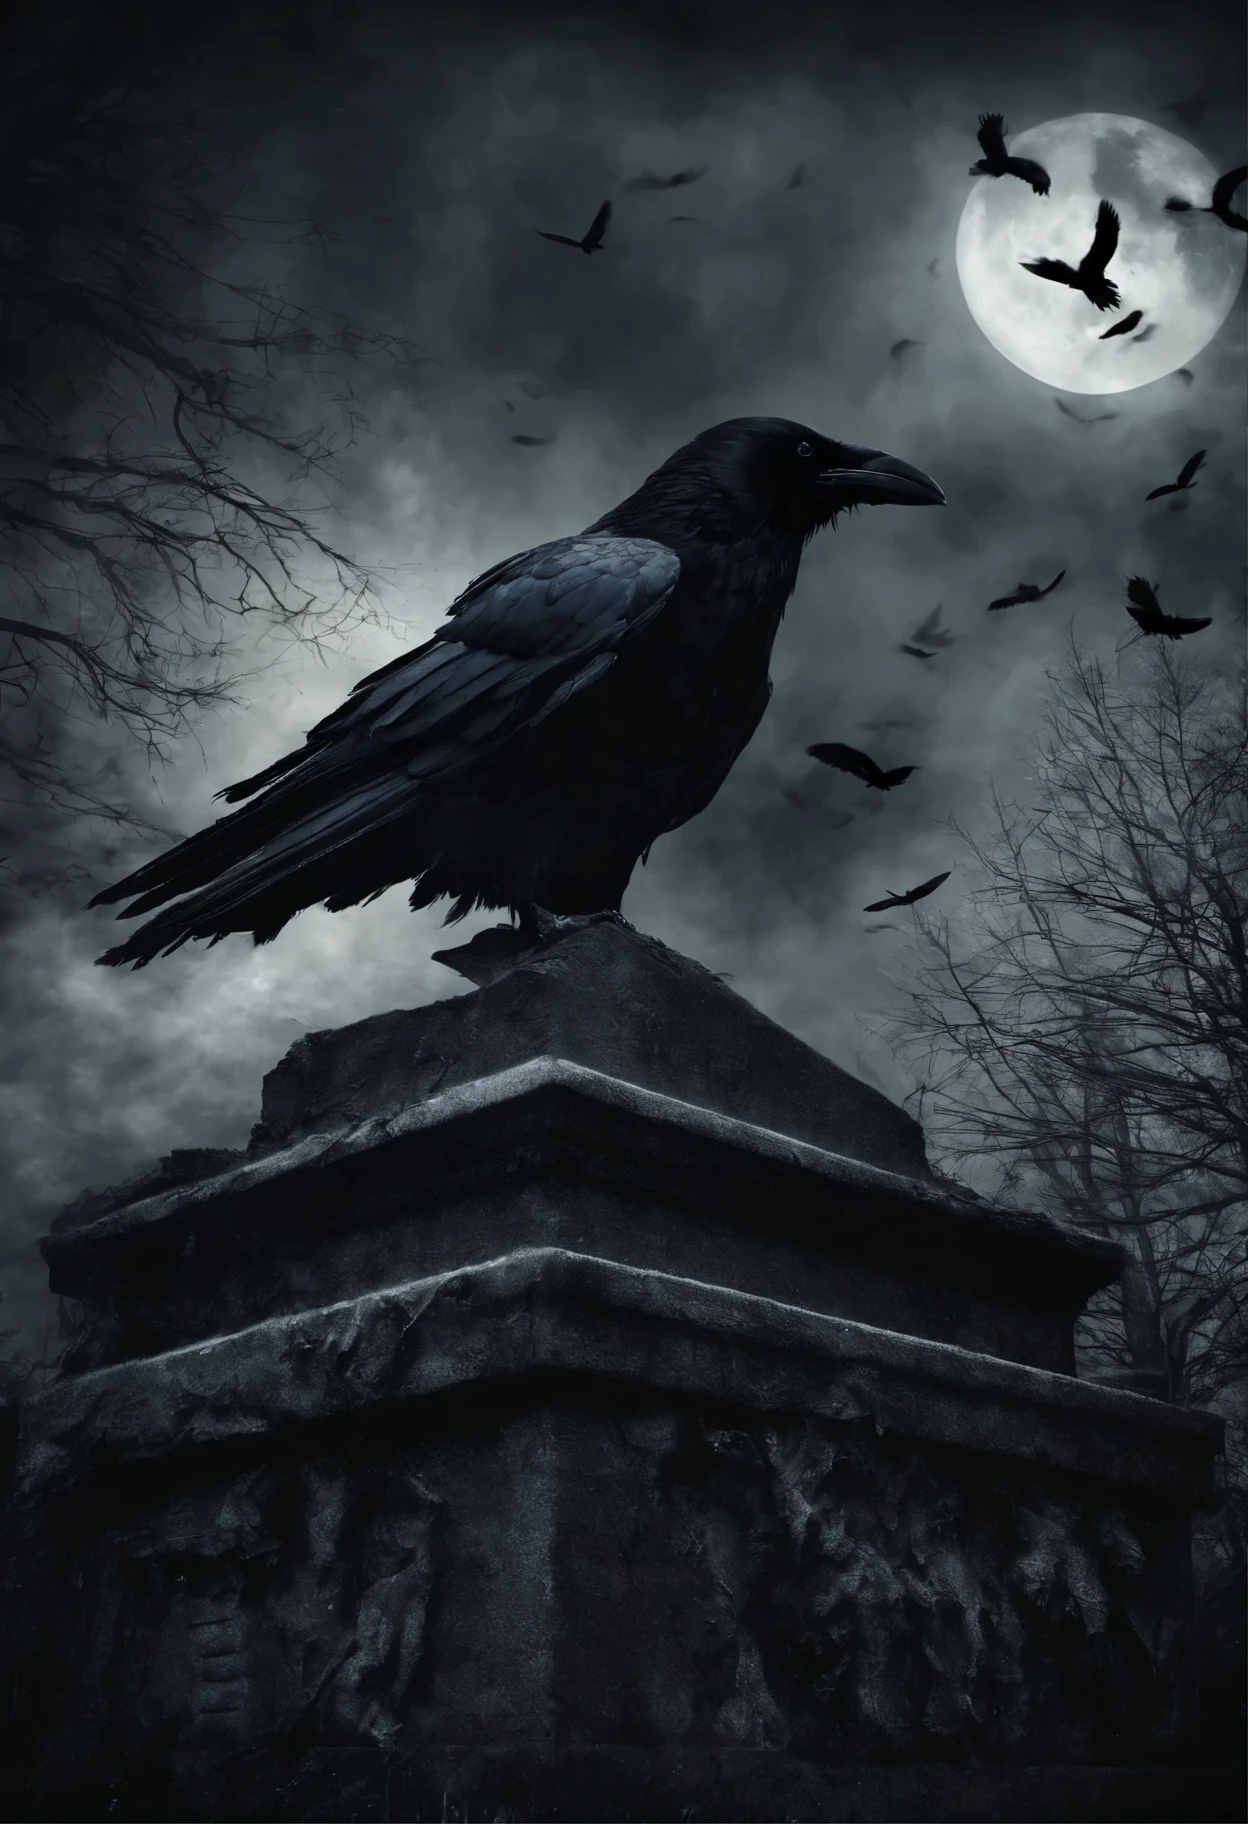 Midnight graveyard, foreground focus on a black crow, detailed feather texture, intense stare, eerie atmosphere, multiple crows fluttering in the background, moonlit tombstones, decaying leaves, silent night, misty air, dark shadows, mysterious ghastly scene